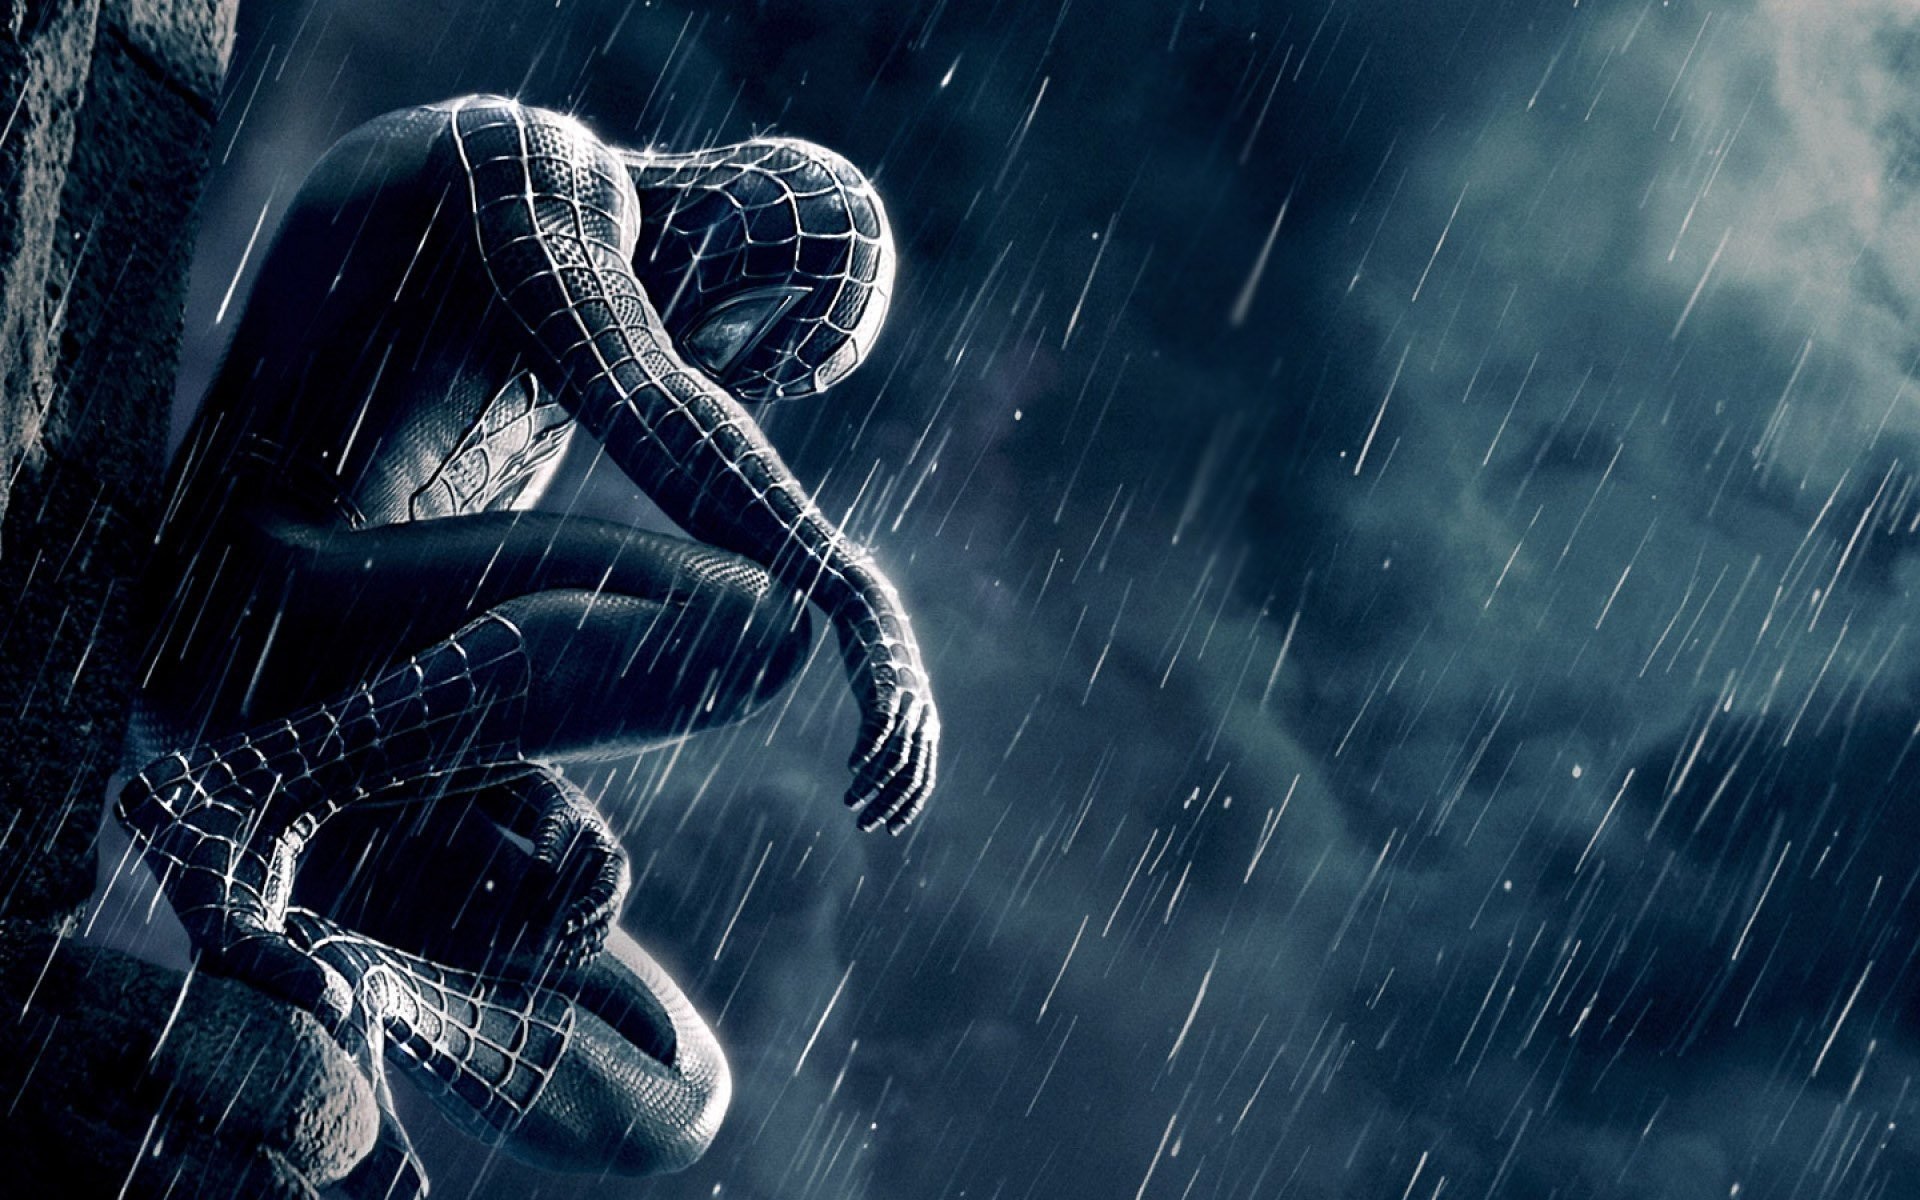 Spiderman 1080P 2k 4k Full HD Wallpapers Backgrounds Free Download   Wallpaper Crafter